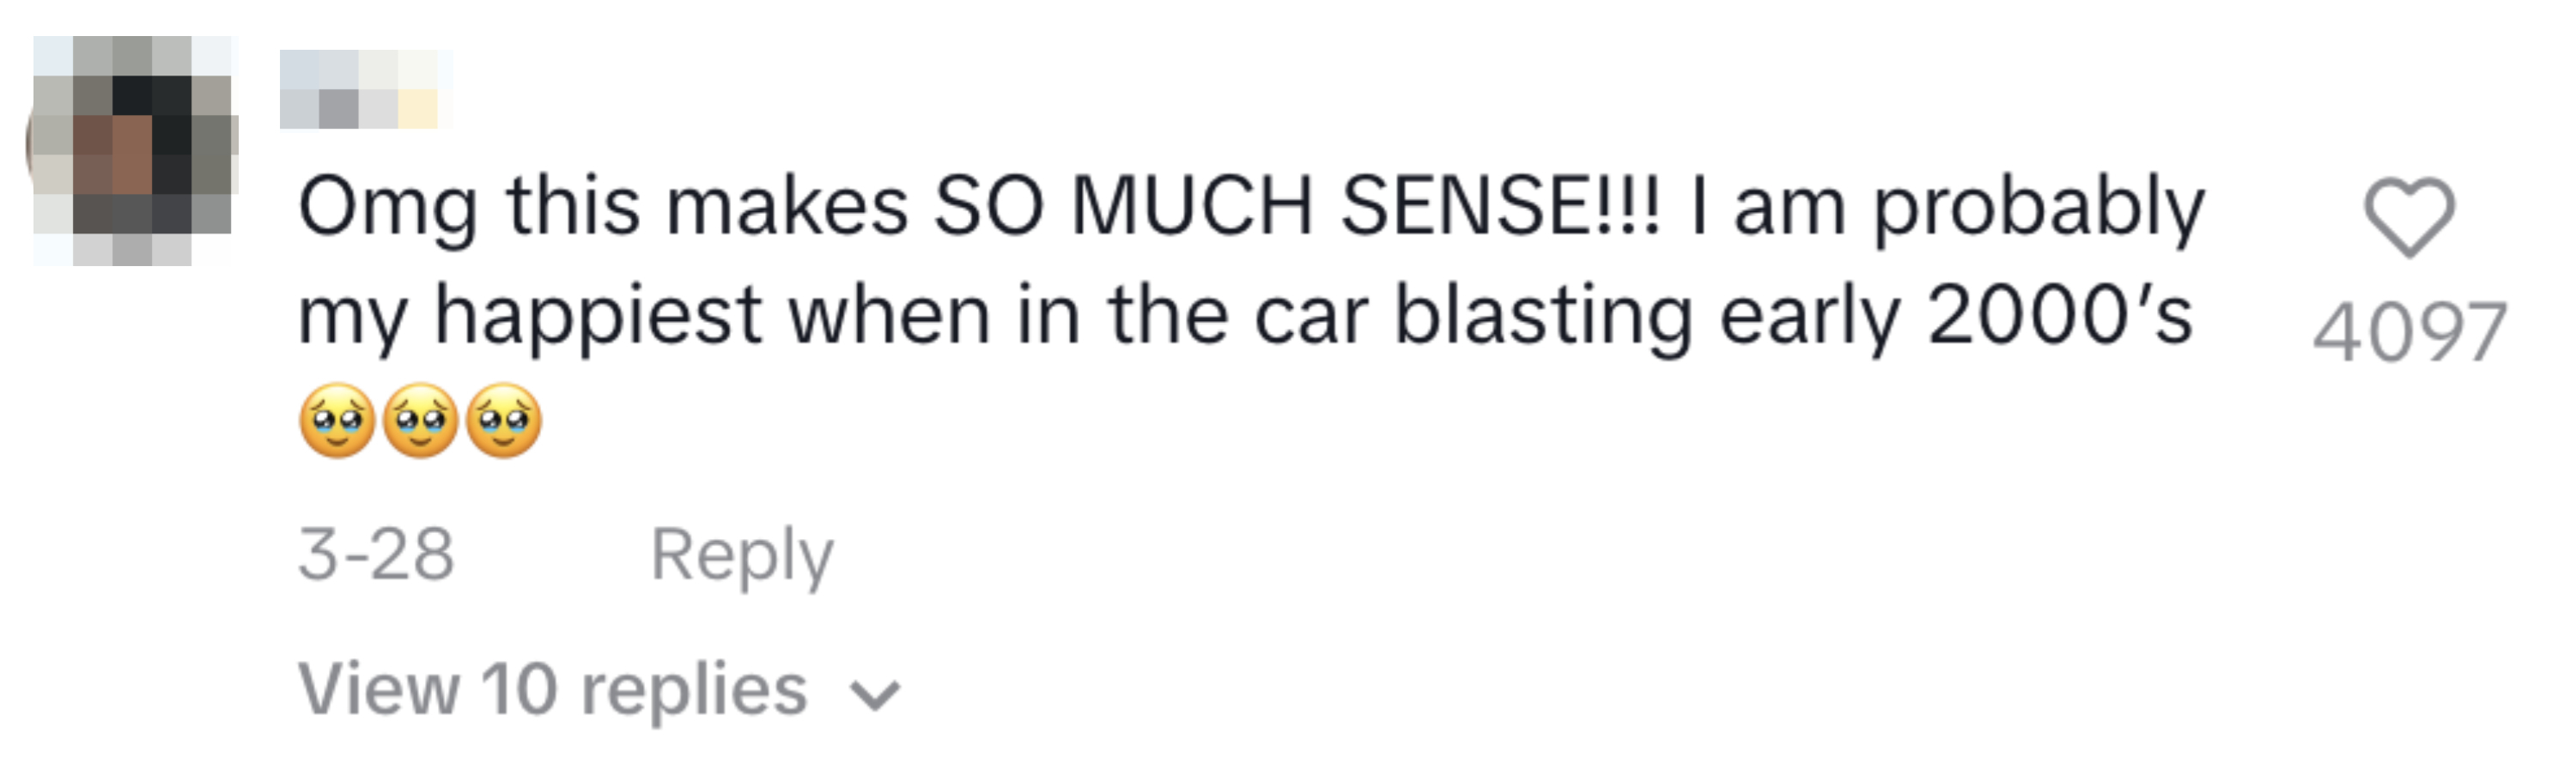 The image shows a social media comment by a user, expressing joy about listening to early 2000s music in the car